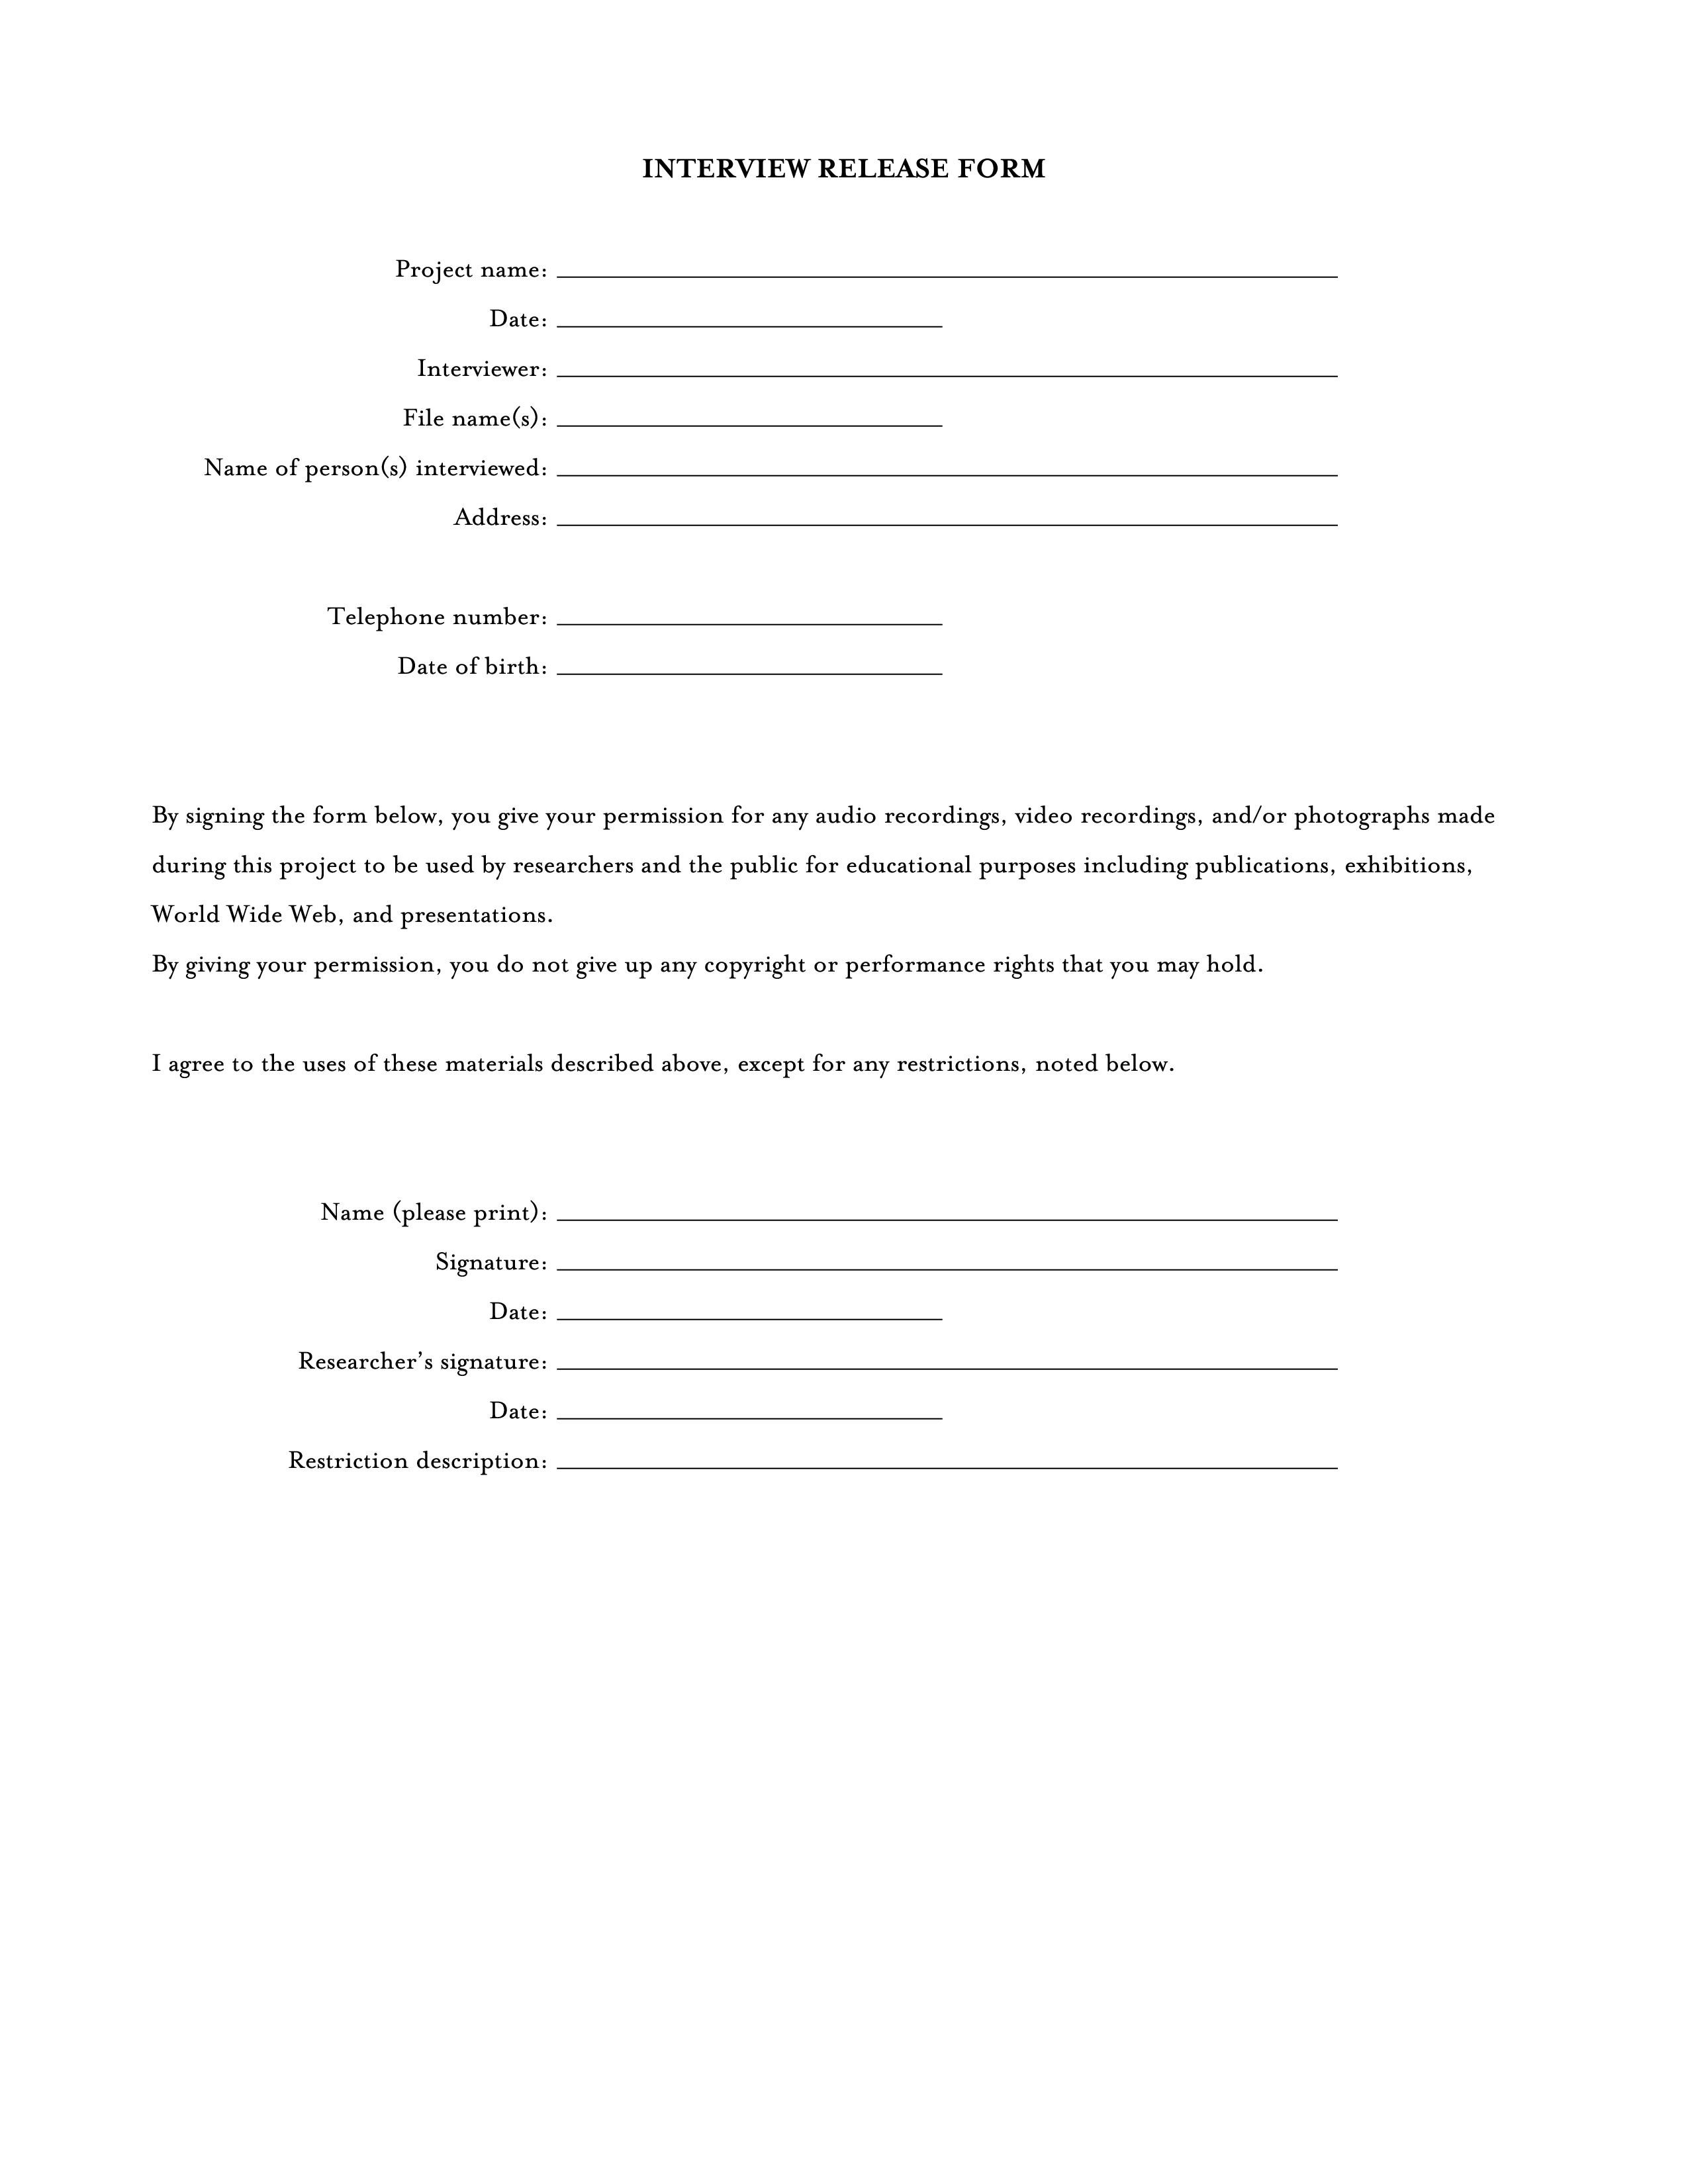 interview release form template